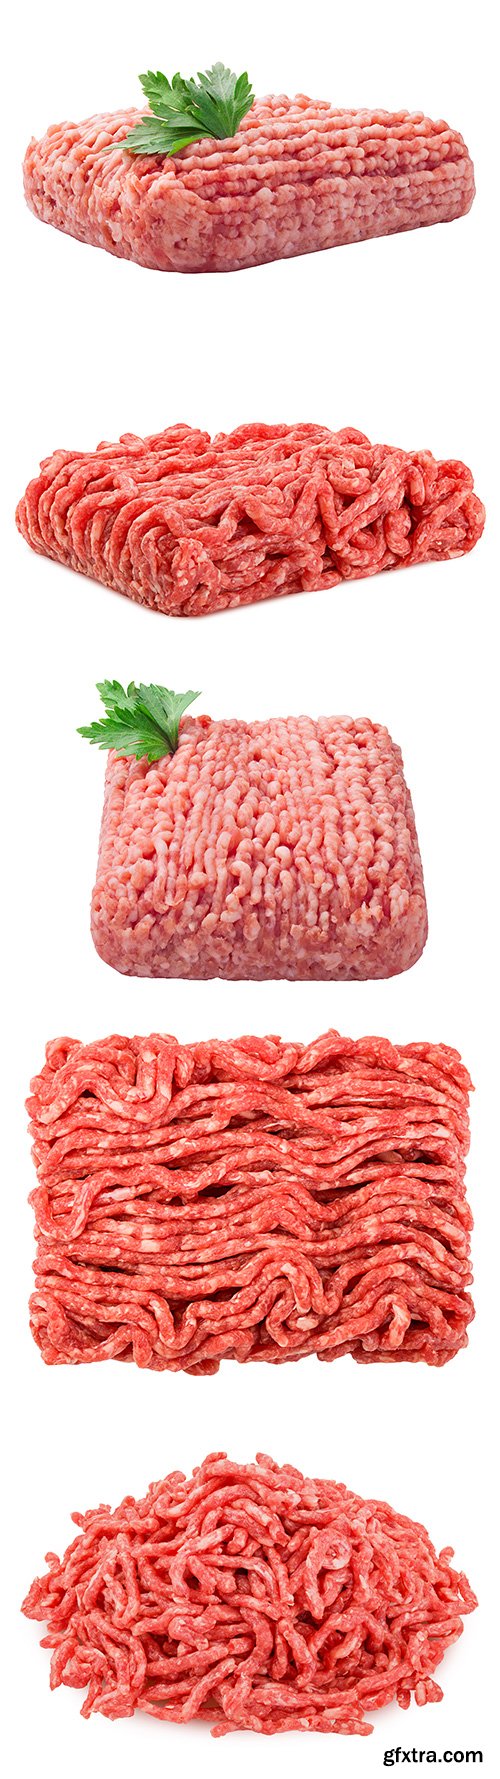 Minced Meat Isolated - 7xJPGs